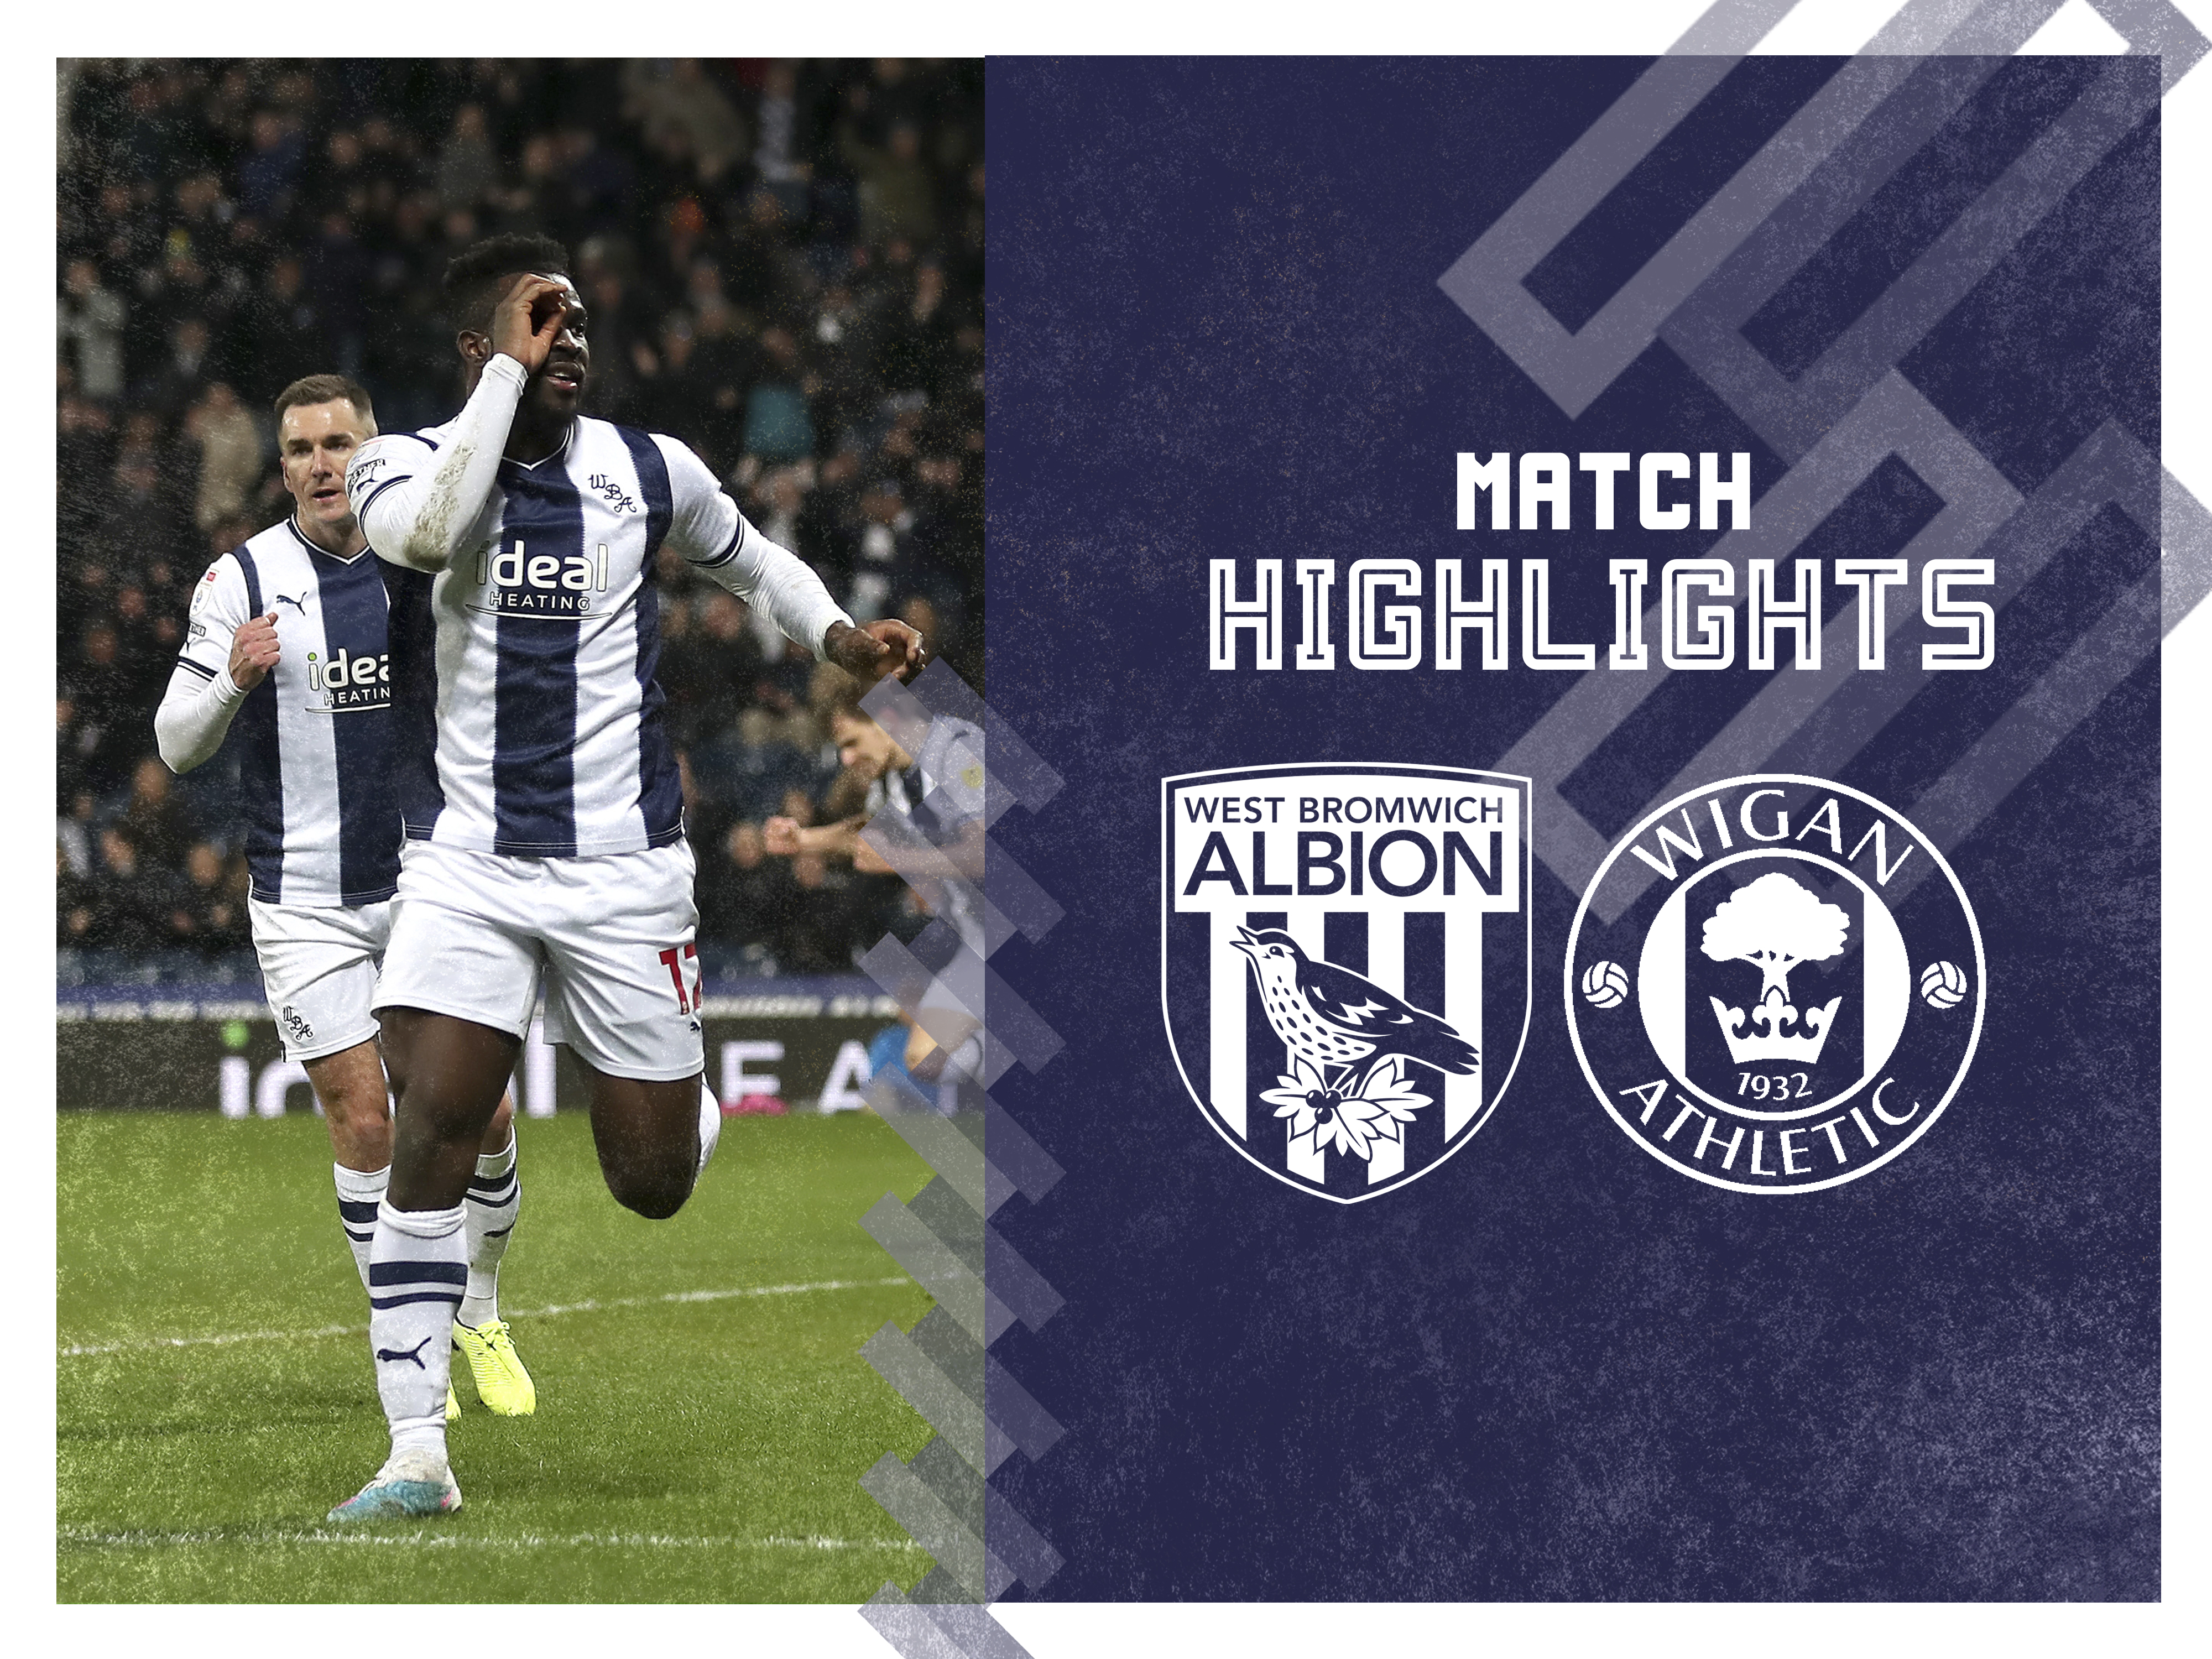 Albion v Wigan Athletic Match Highlights